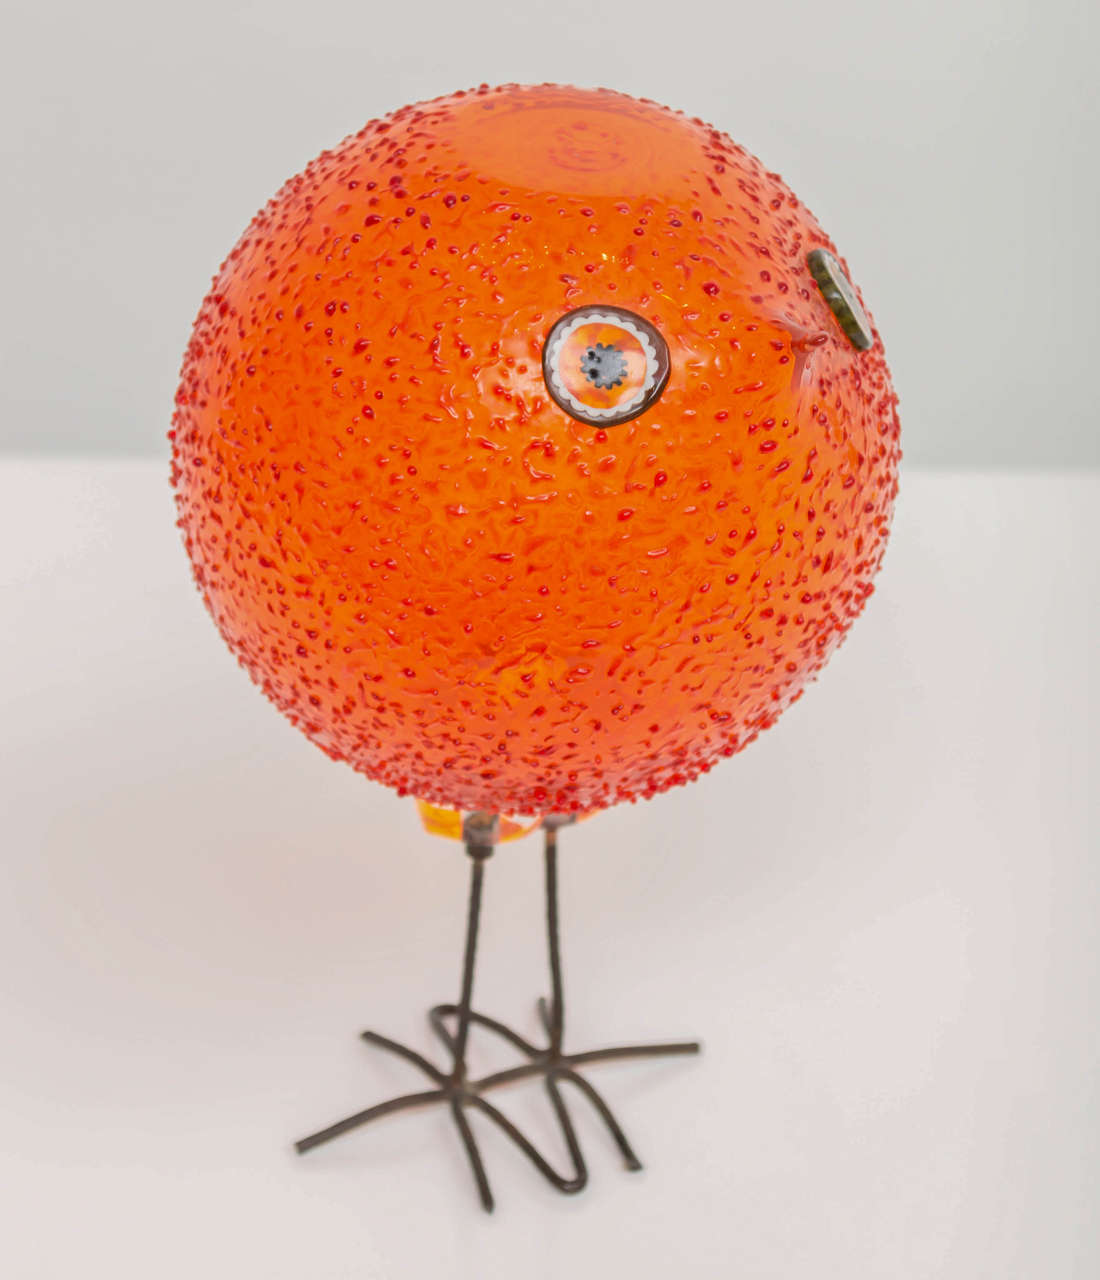 Highly sought after "Pulcini" glass bird sculpture for Vistosi.
Handblown glass with murine eyes and bronze feet.